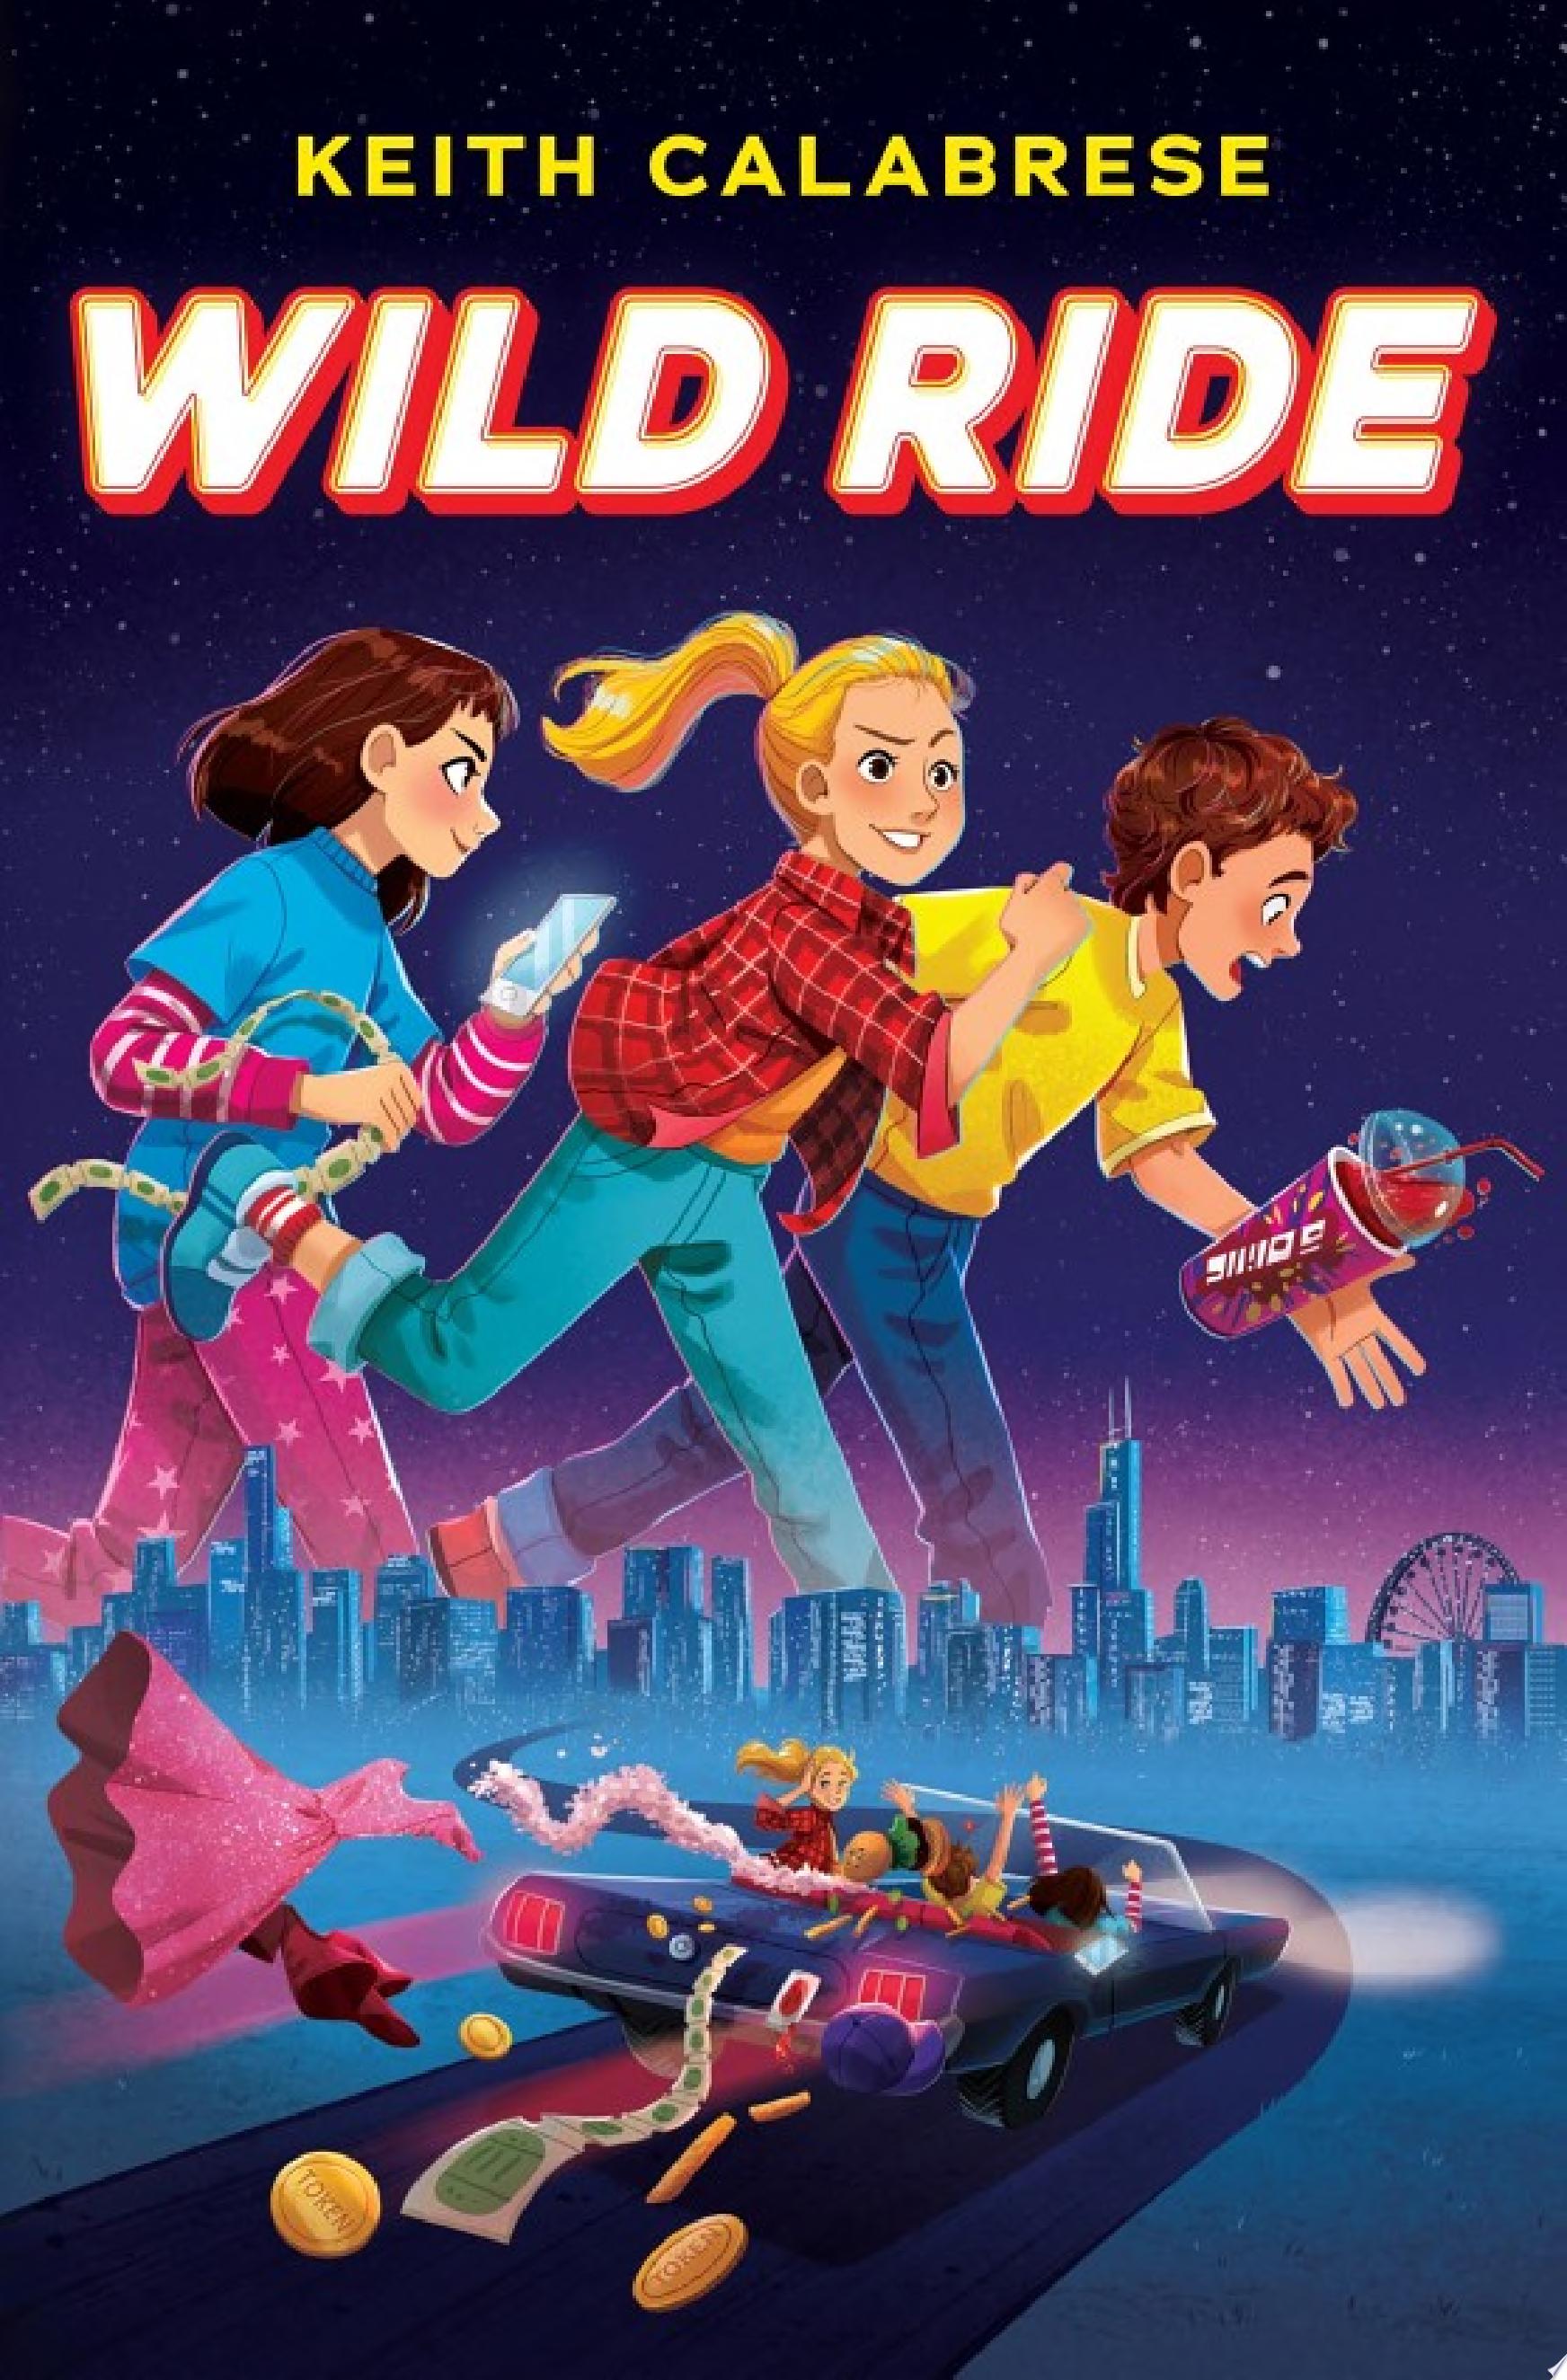 Image for "Wild Ride"